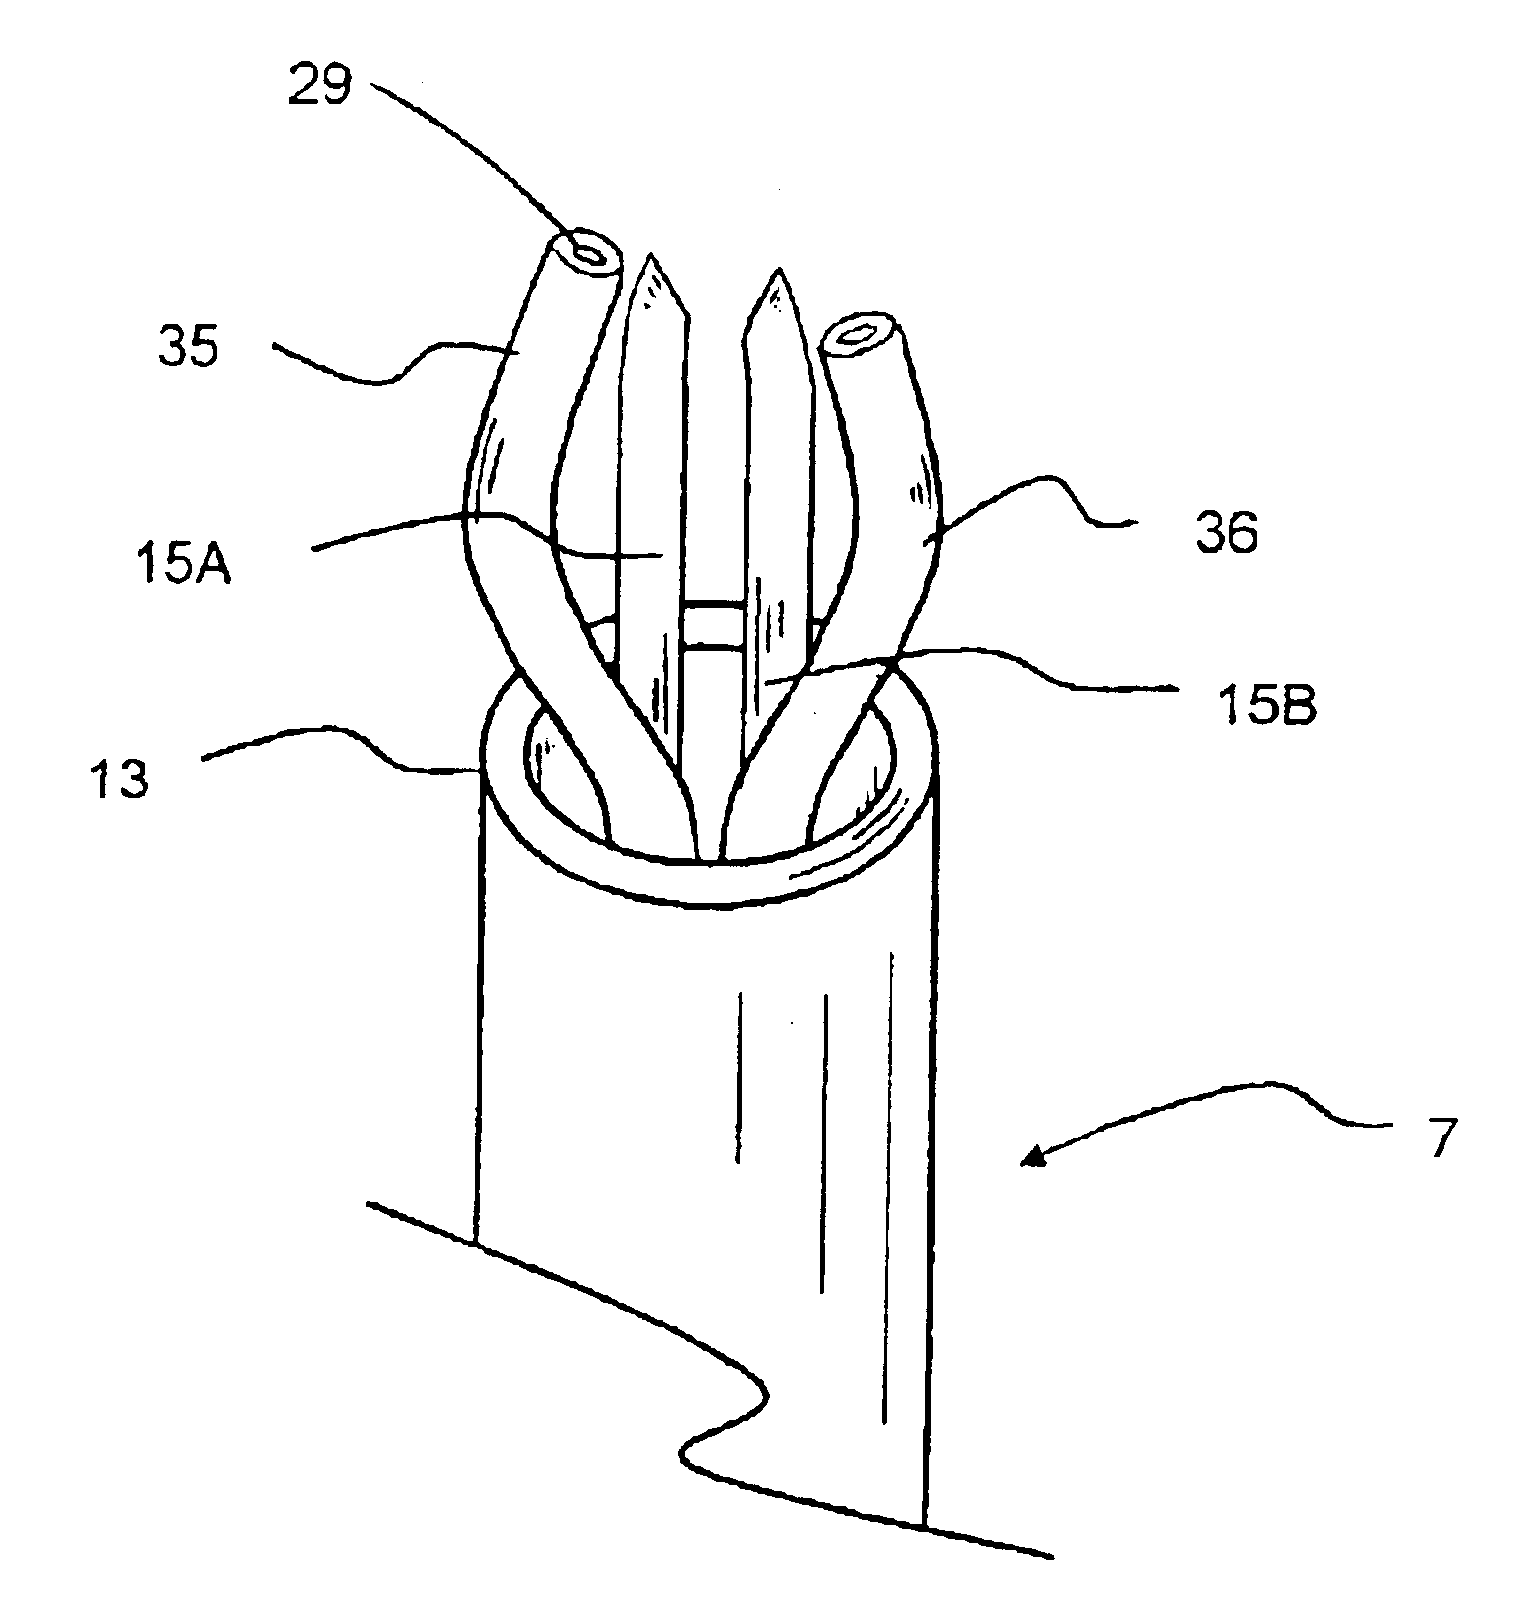 Cardiac valve leaflet attachment device and methods thereof